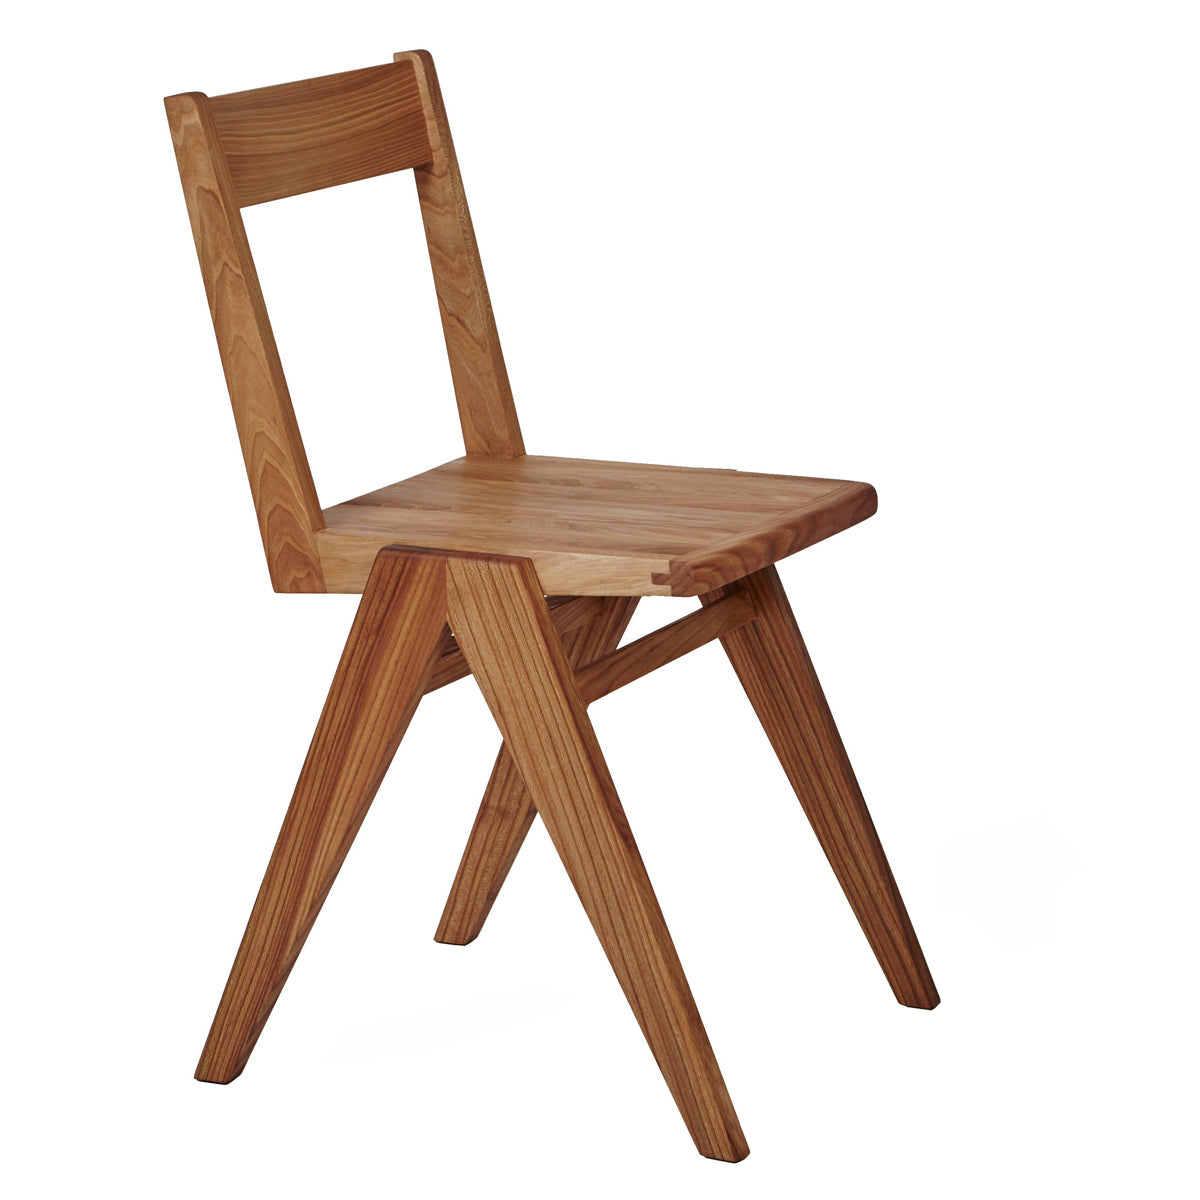 Chair No. 01